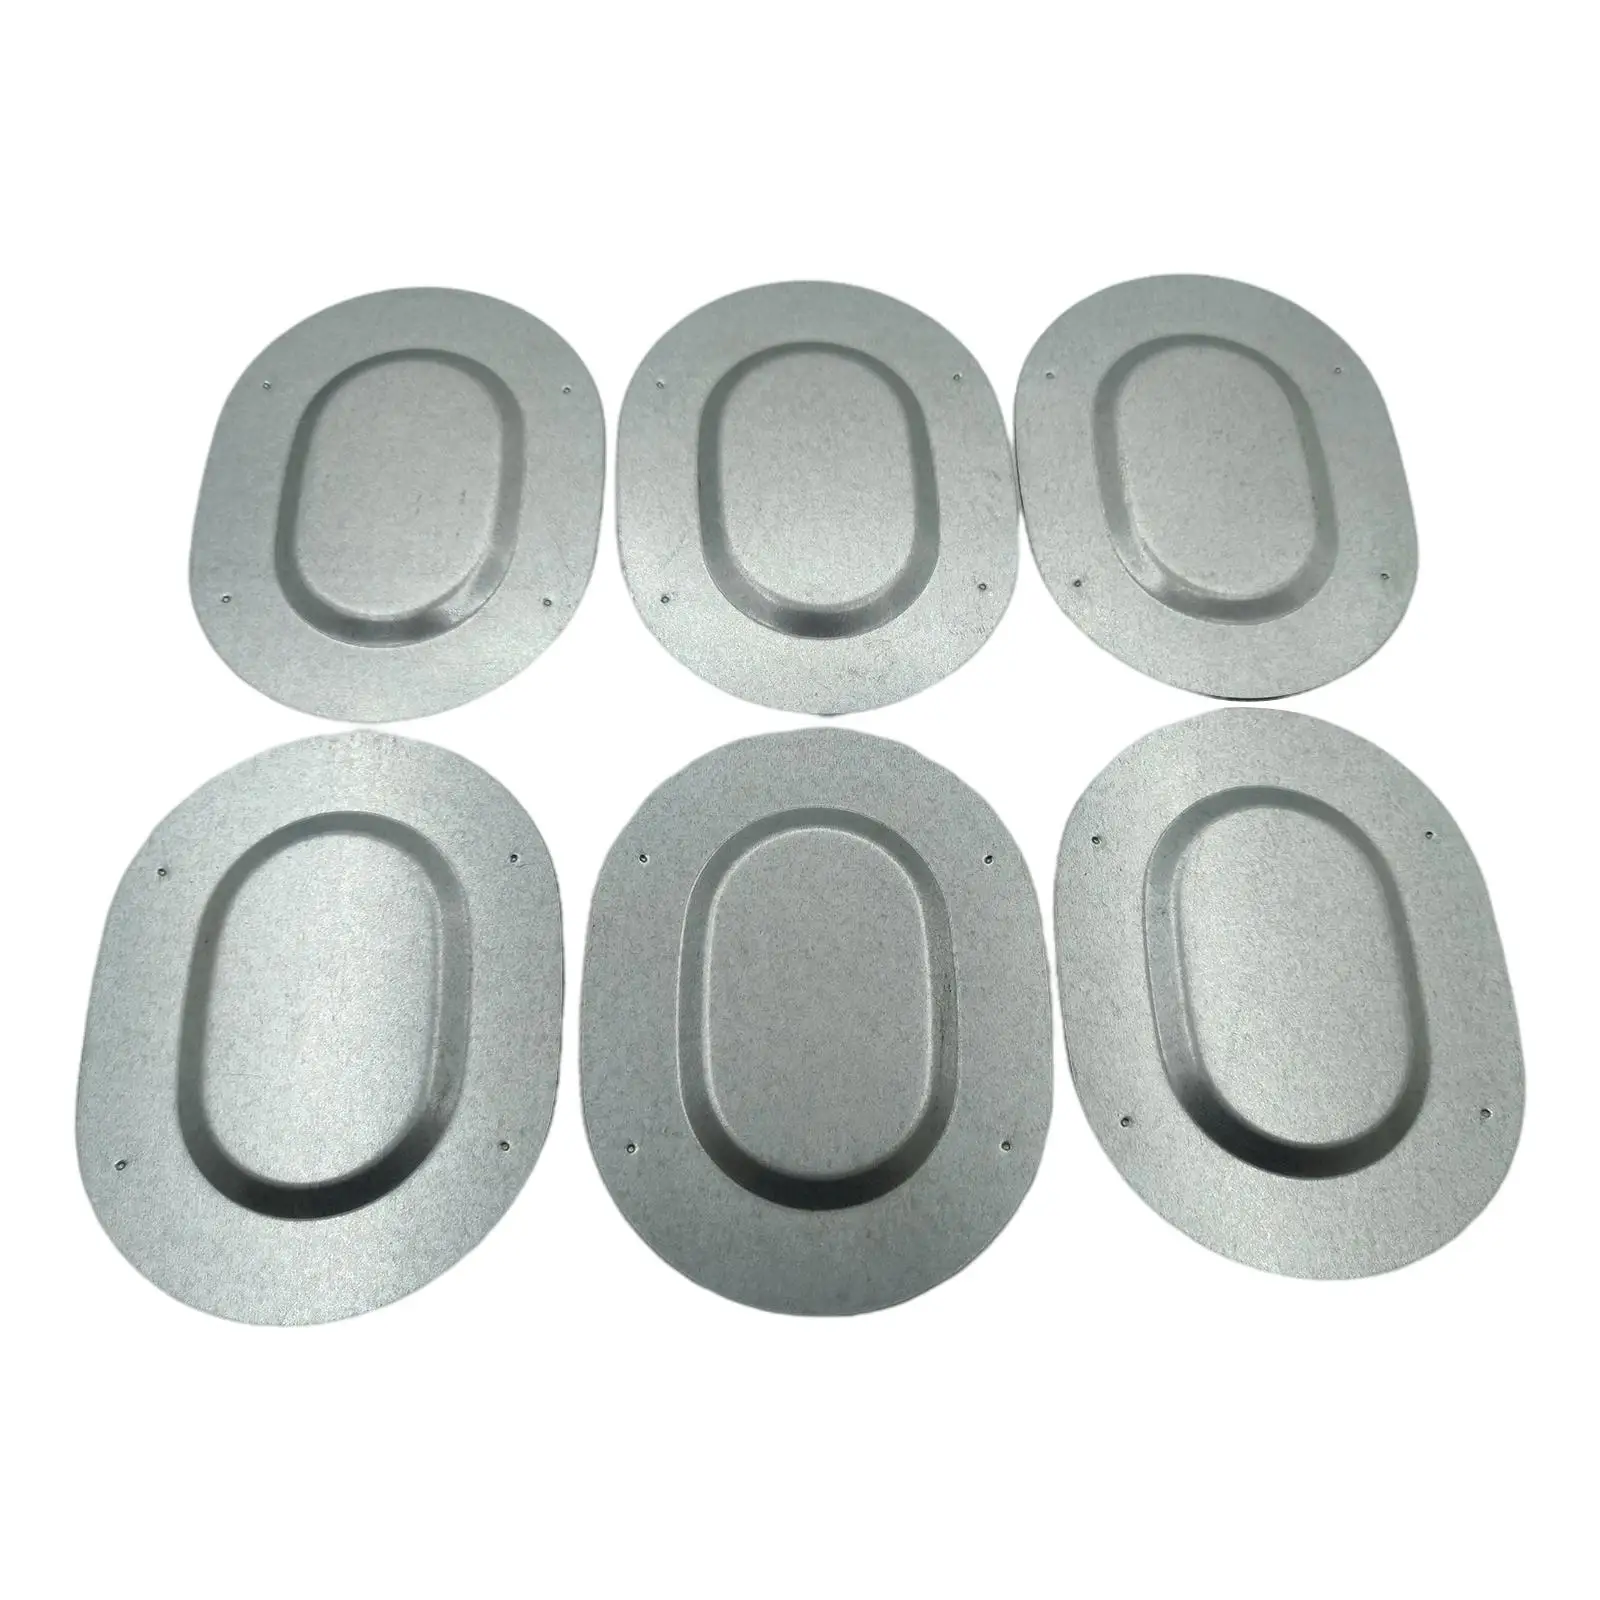 6x Trunk Floor Pan Drain Plugs Set Oval Drain Plug Fit for A-Body